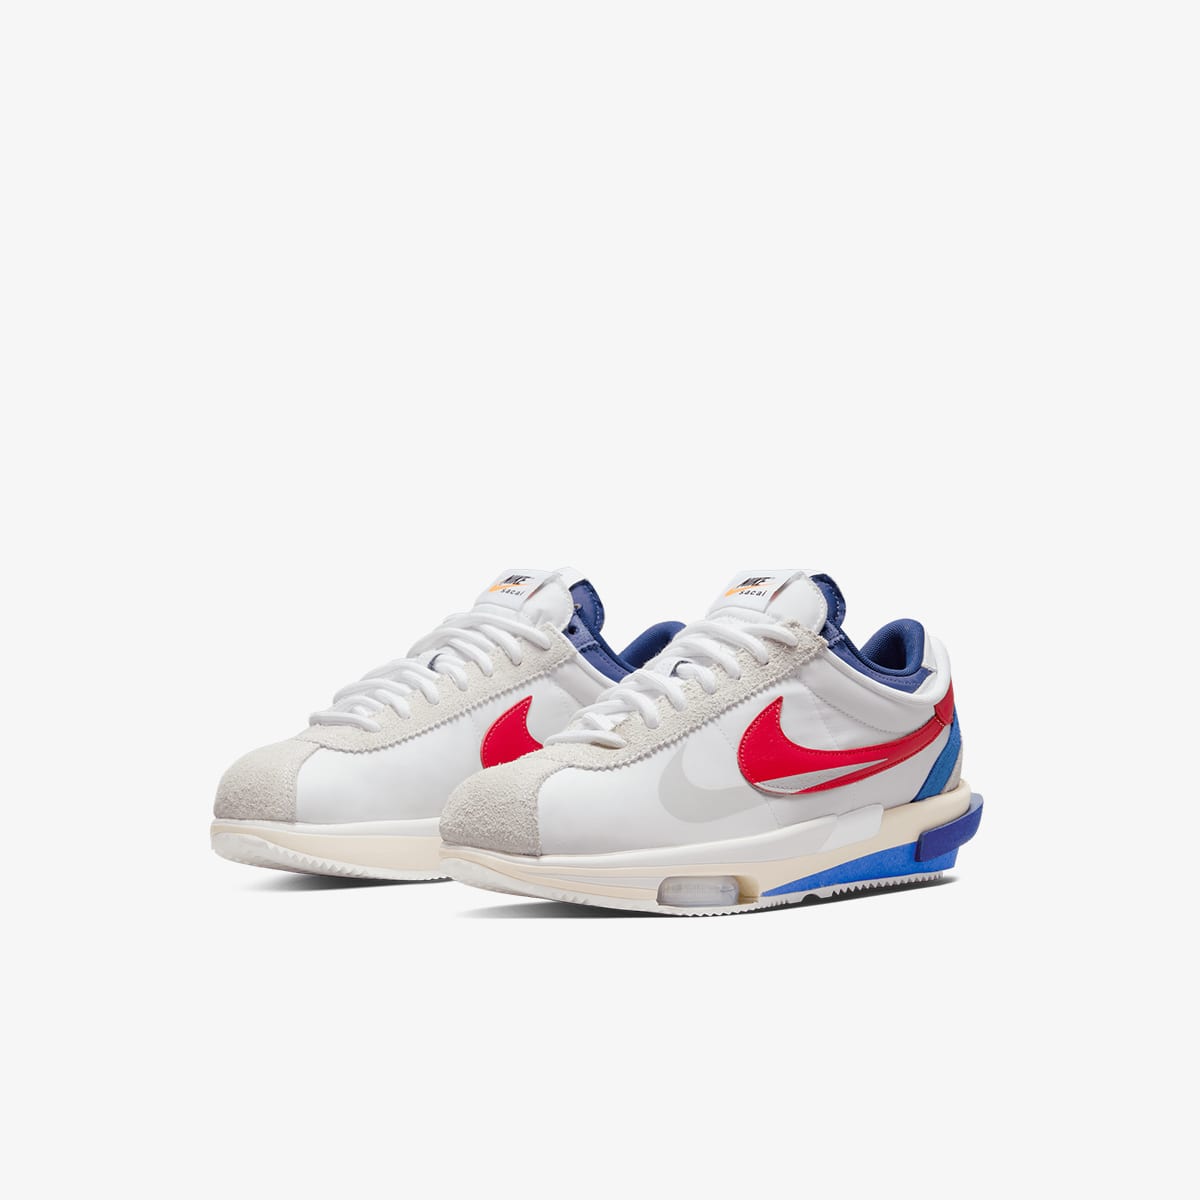 Nike x Sacai Zoom Cortez SP (White & University Red) | END. Launches